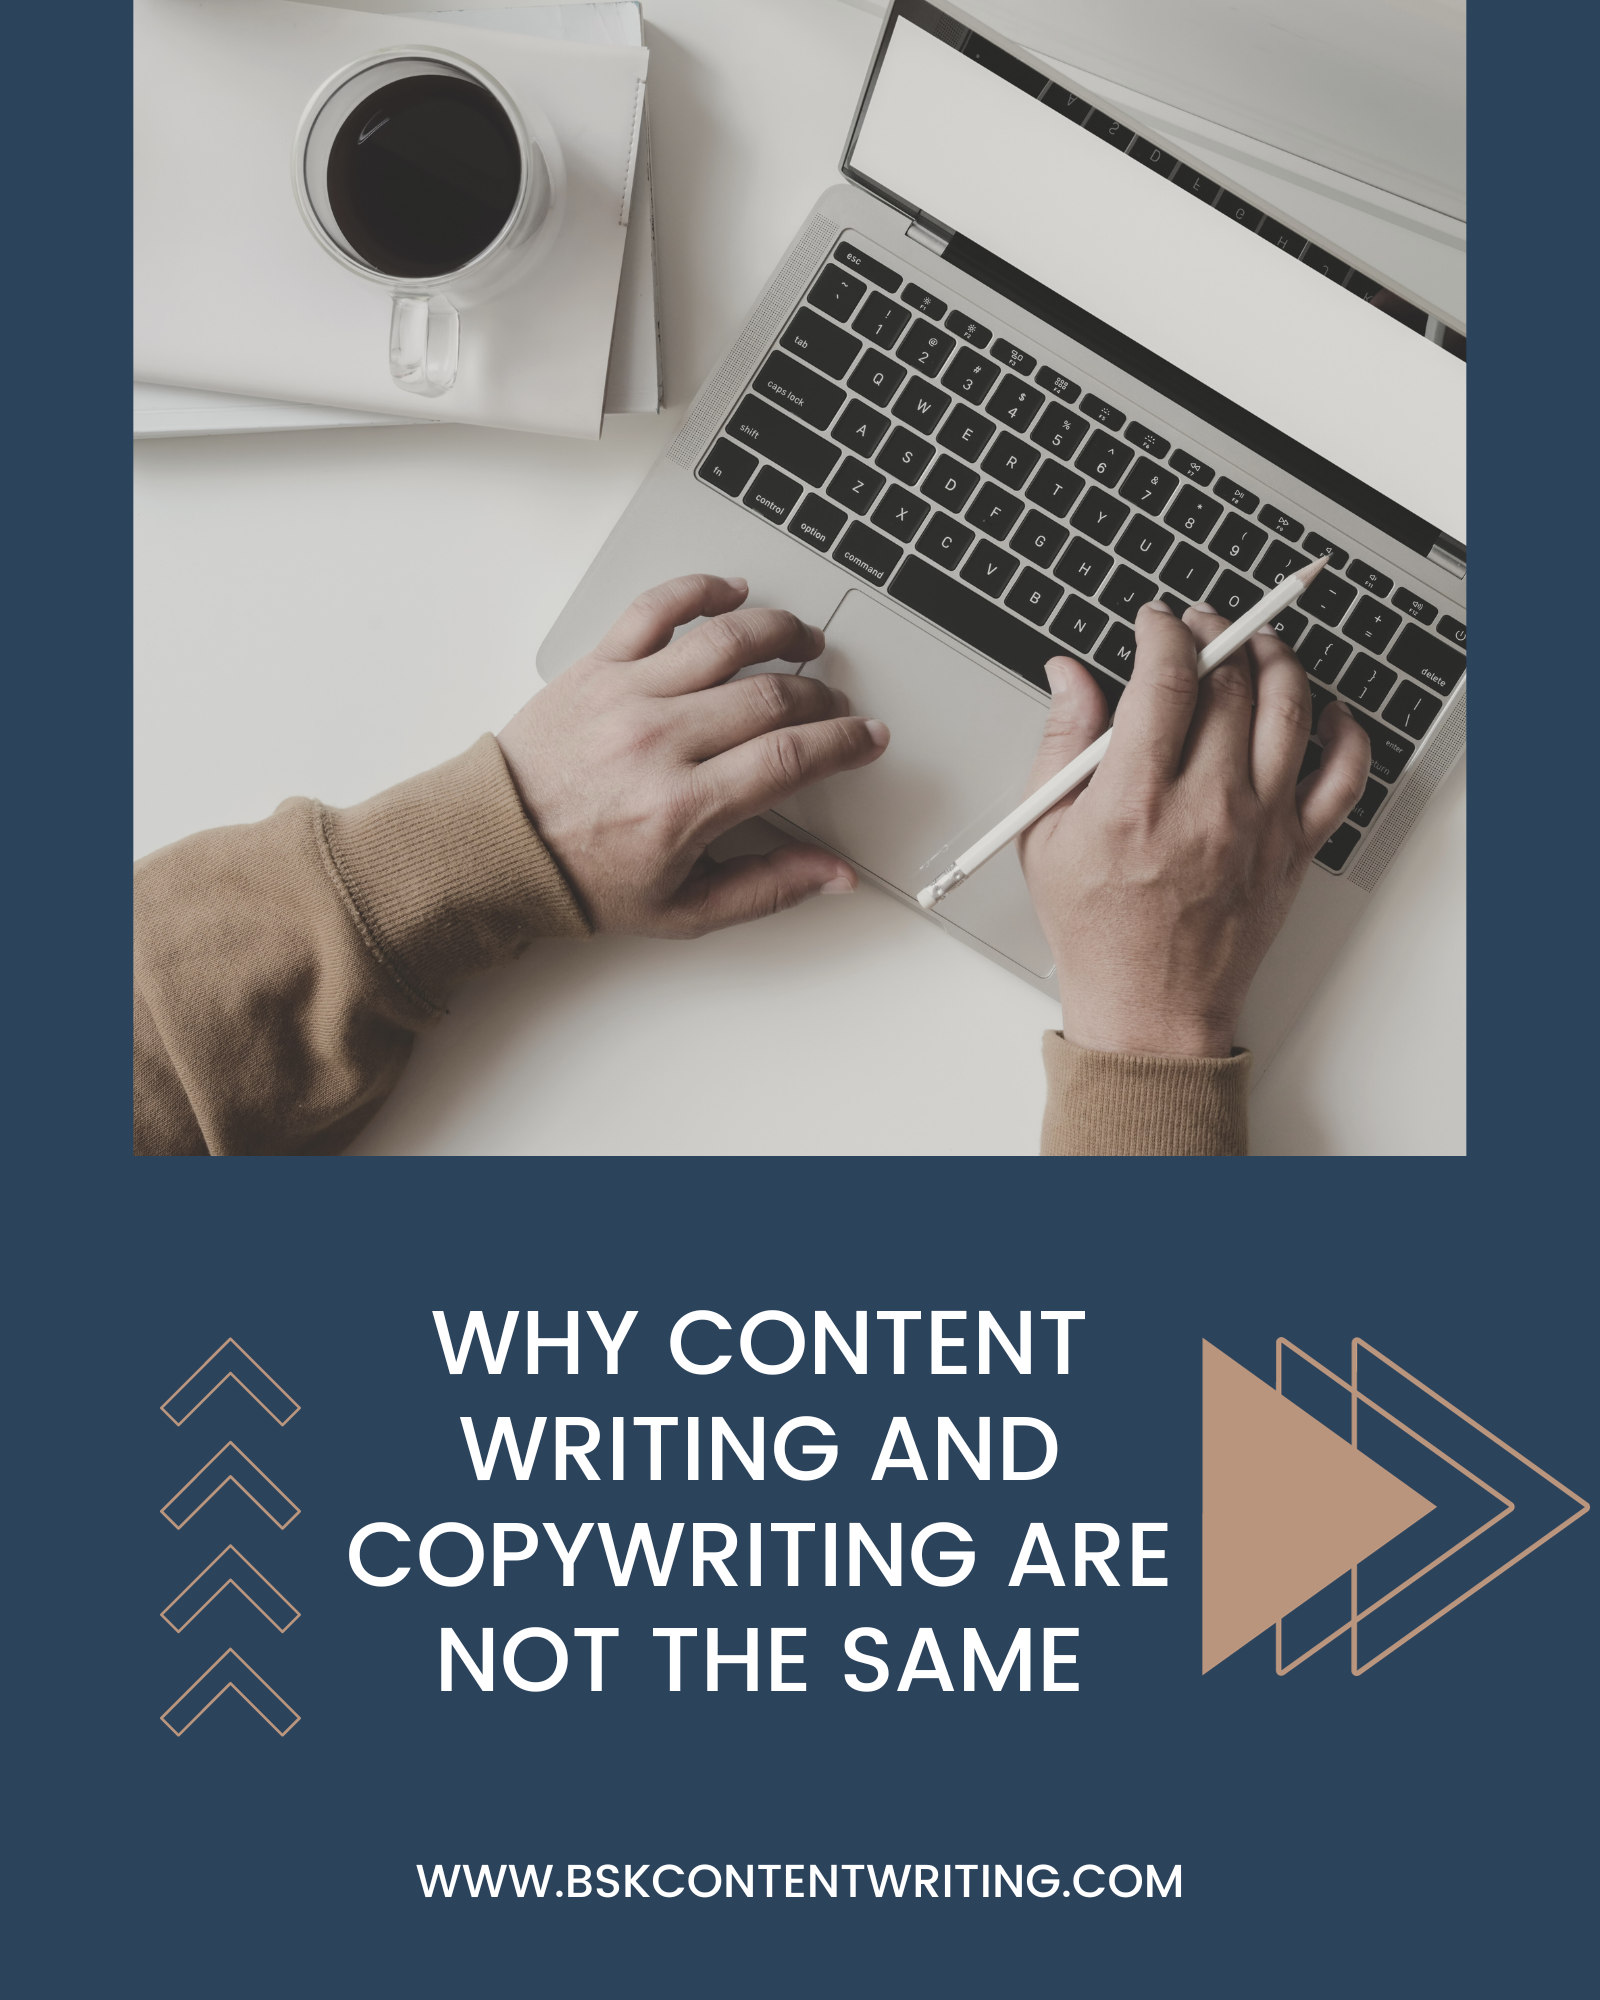 A person typing on a laptop with a cup of coffee and a text overlay that says 'Why content writing and copywriting are not the same' and a website URL 'www.bskcontentwriting.com'. There are two arrows on the image pointing left and right.